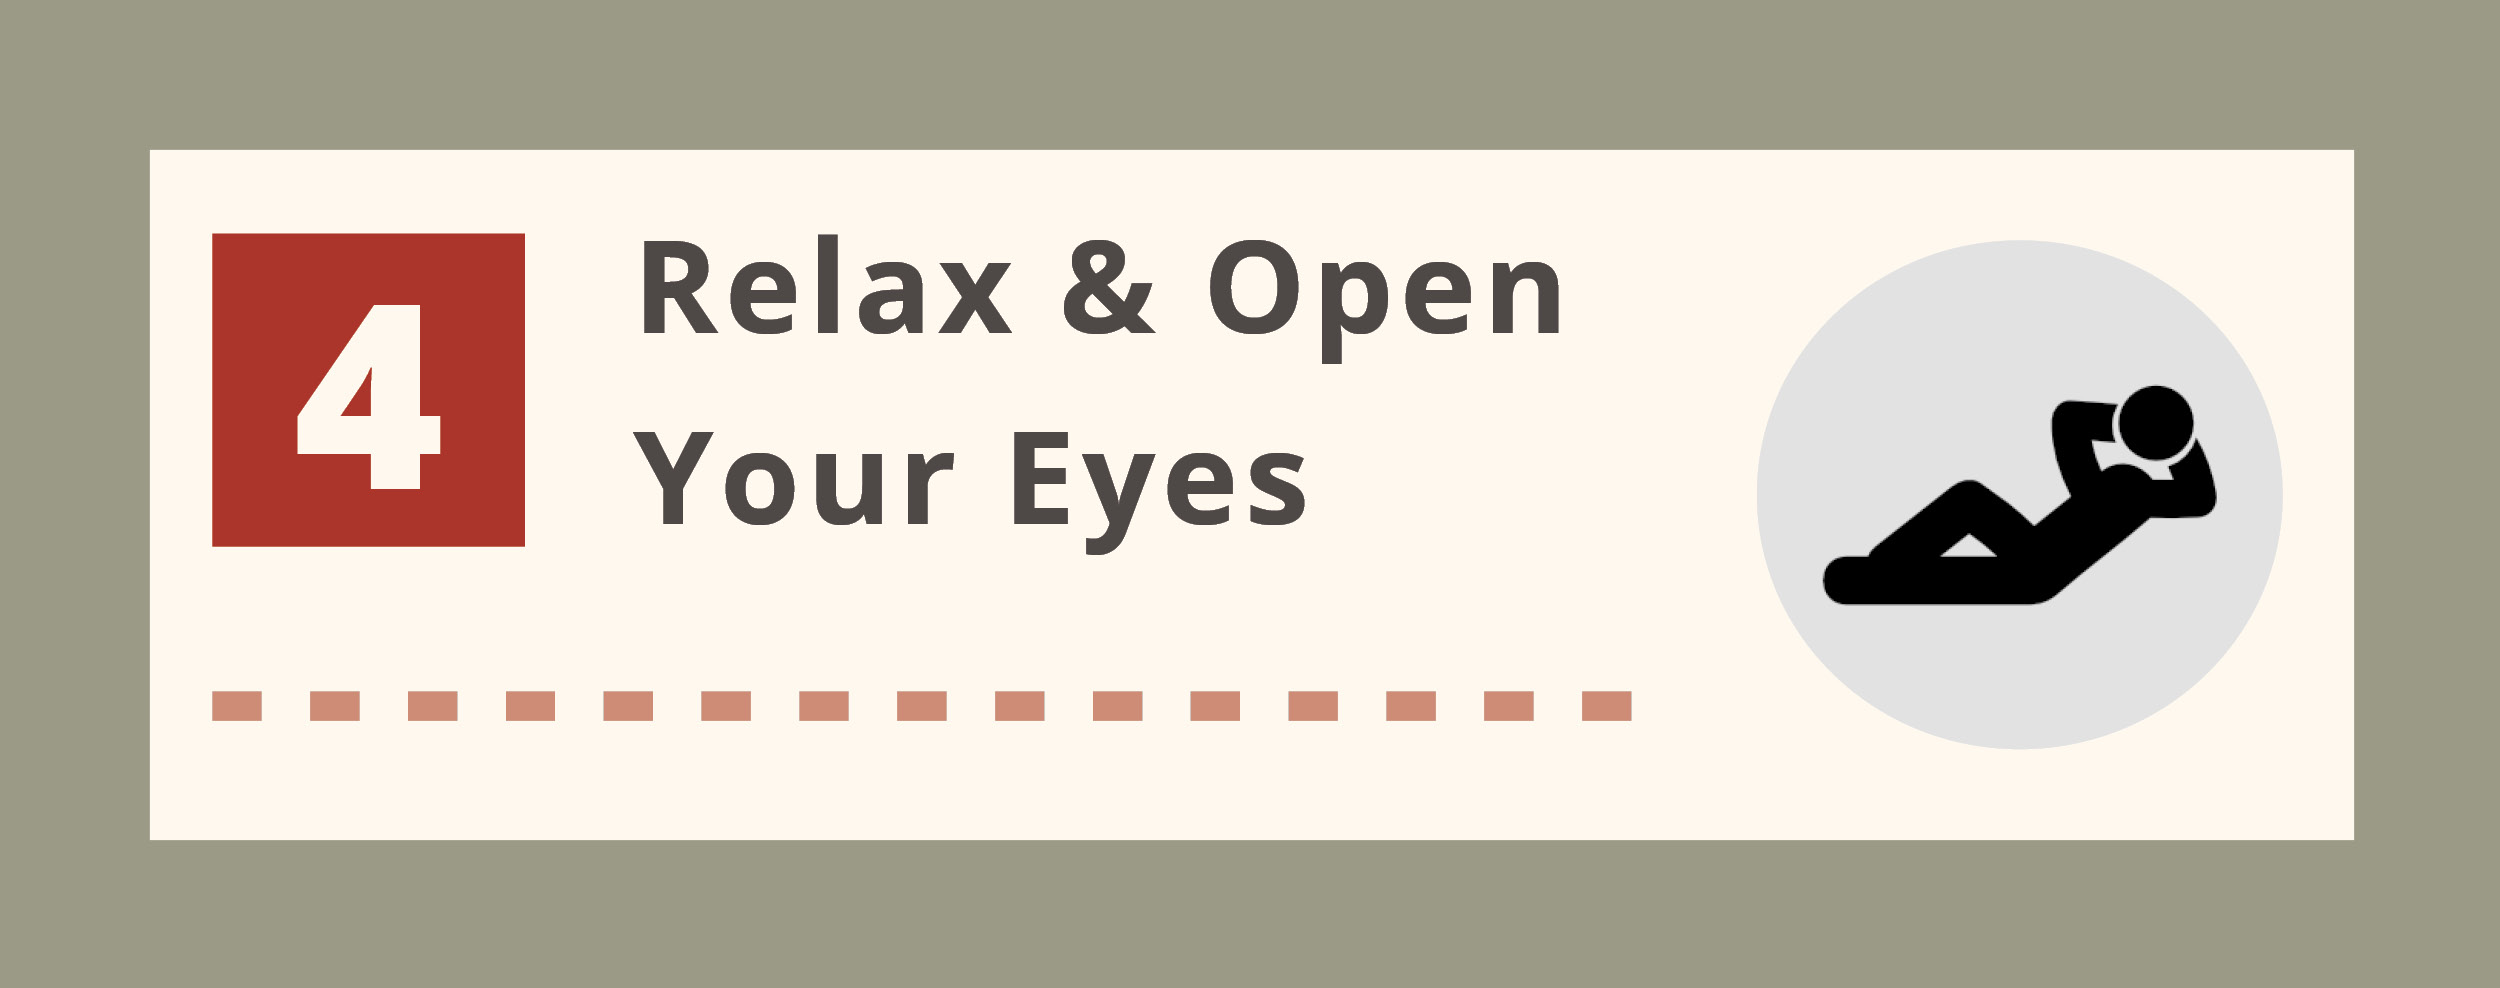 Relax and open your eyes text